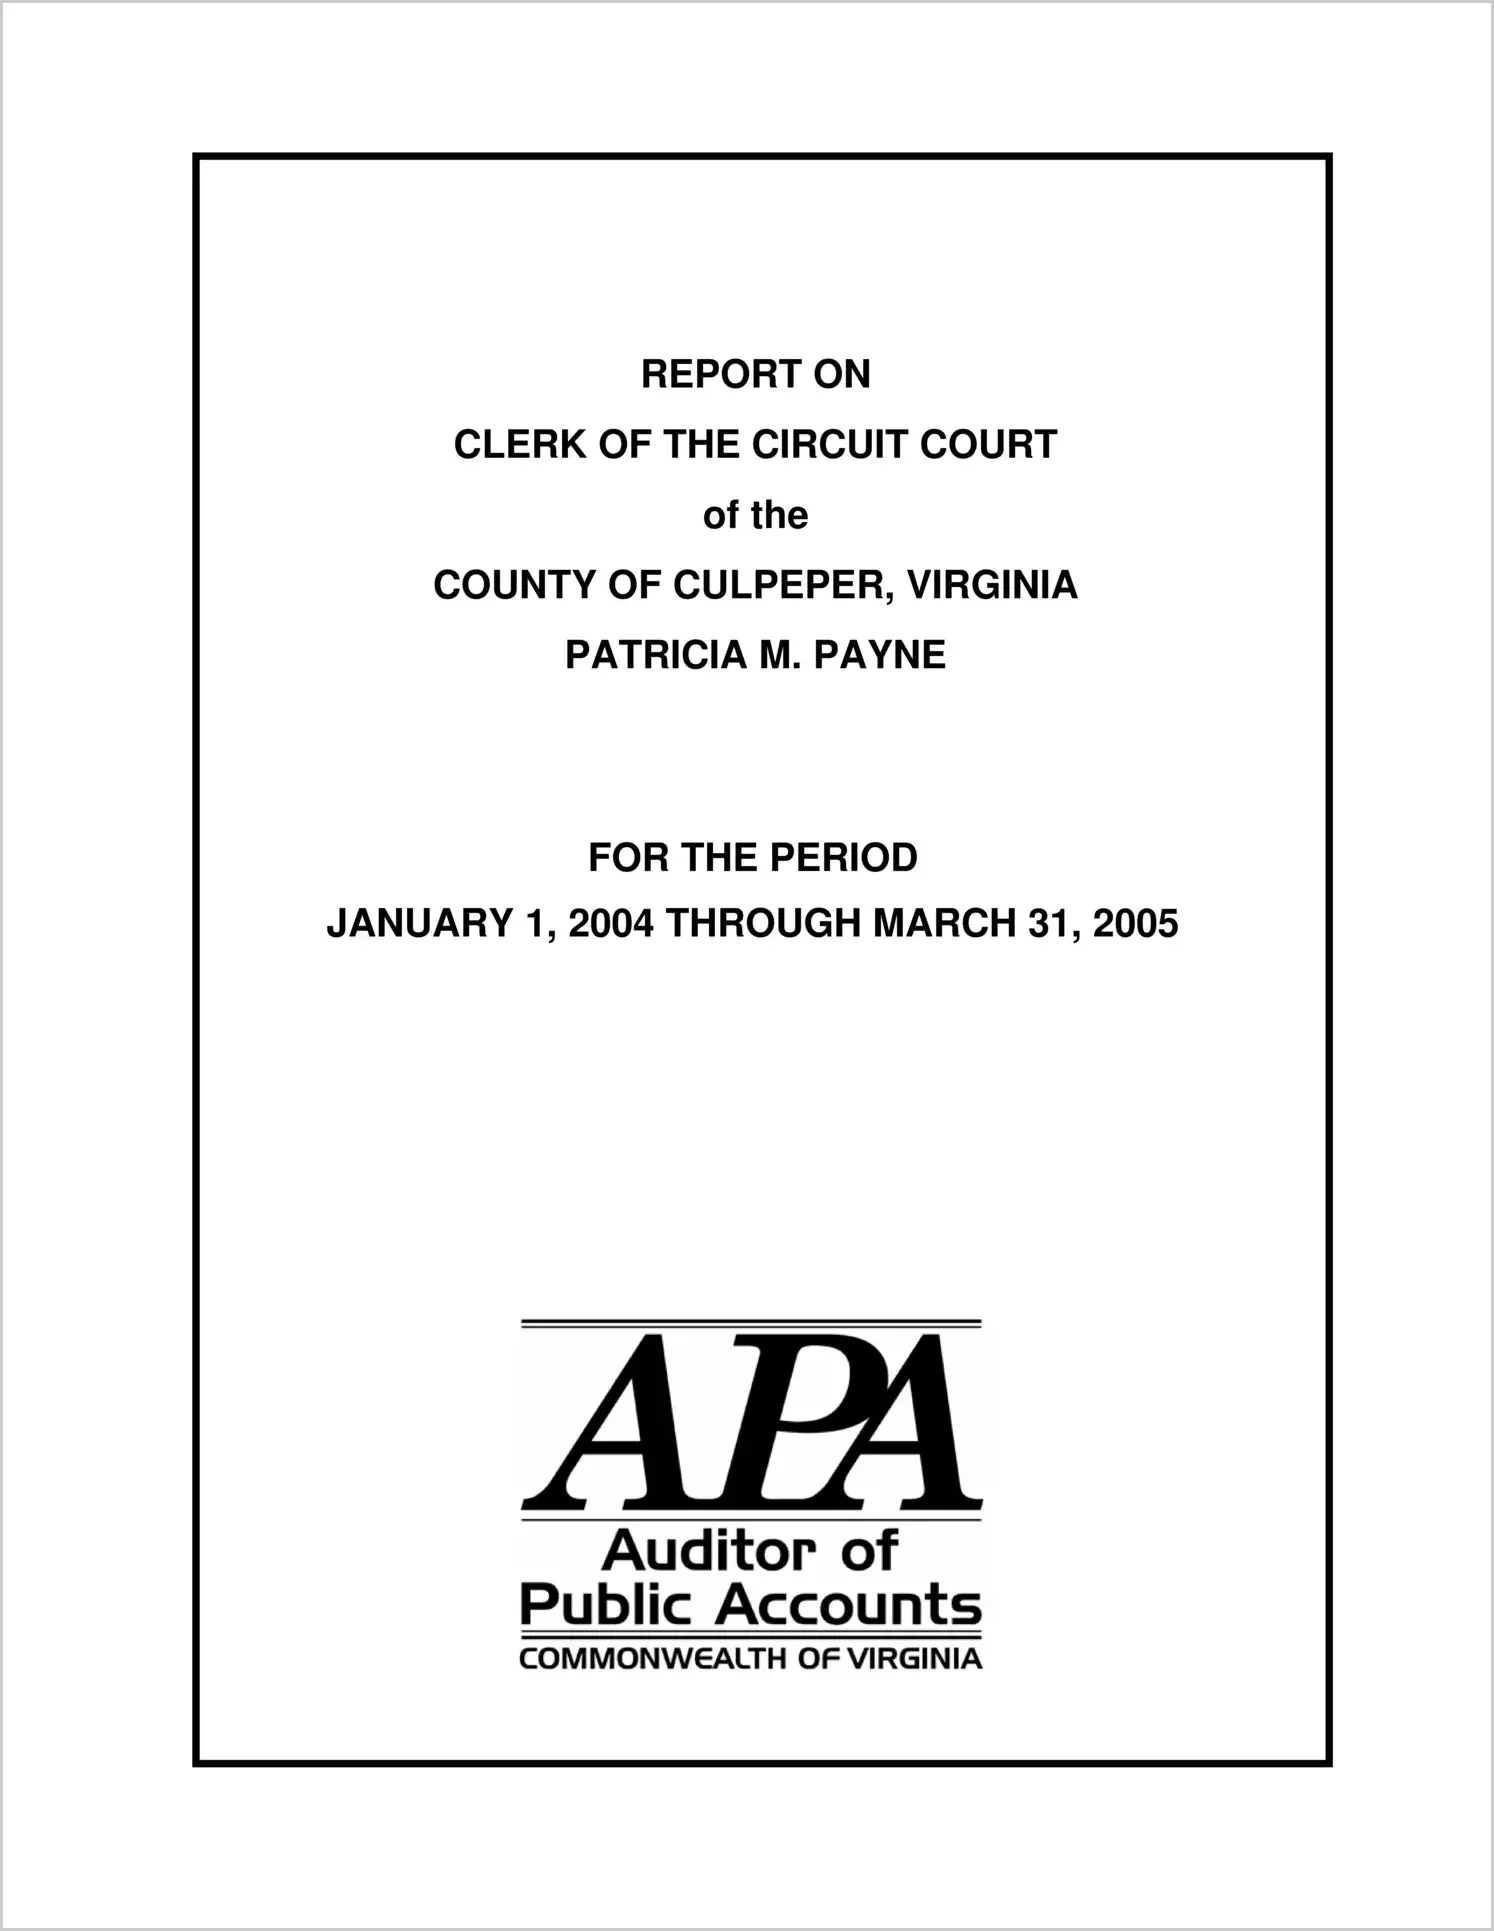 Clerk of the Circuit Court of the County of Culpeper for the period January 1, 2004 through March 31, 2005